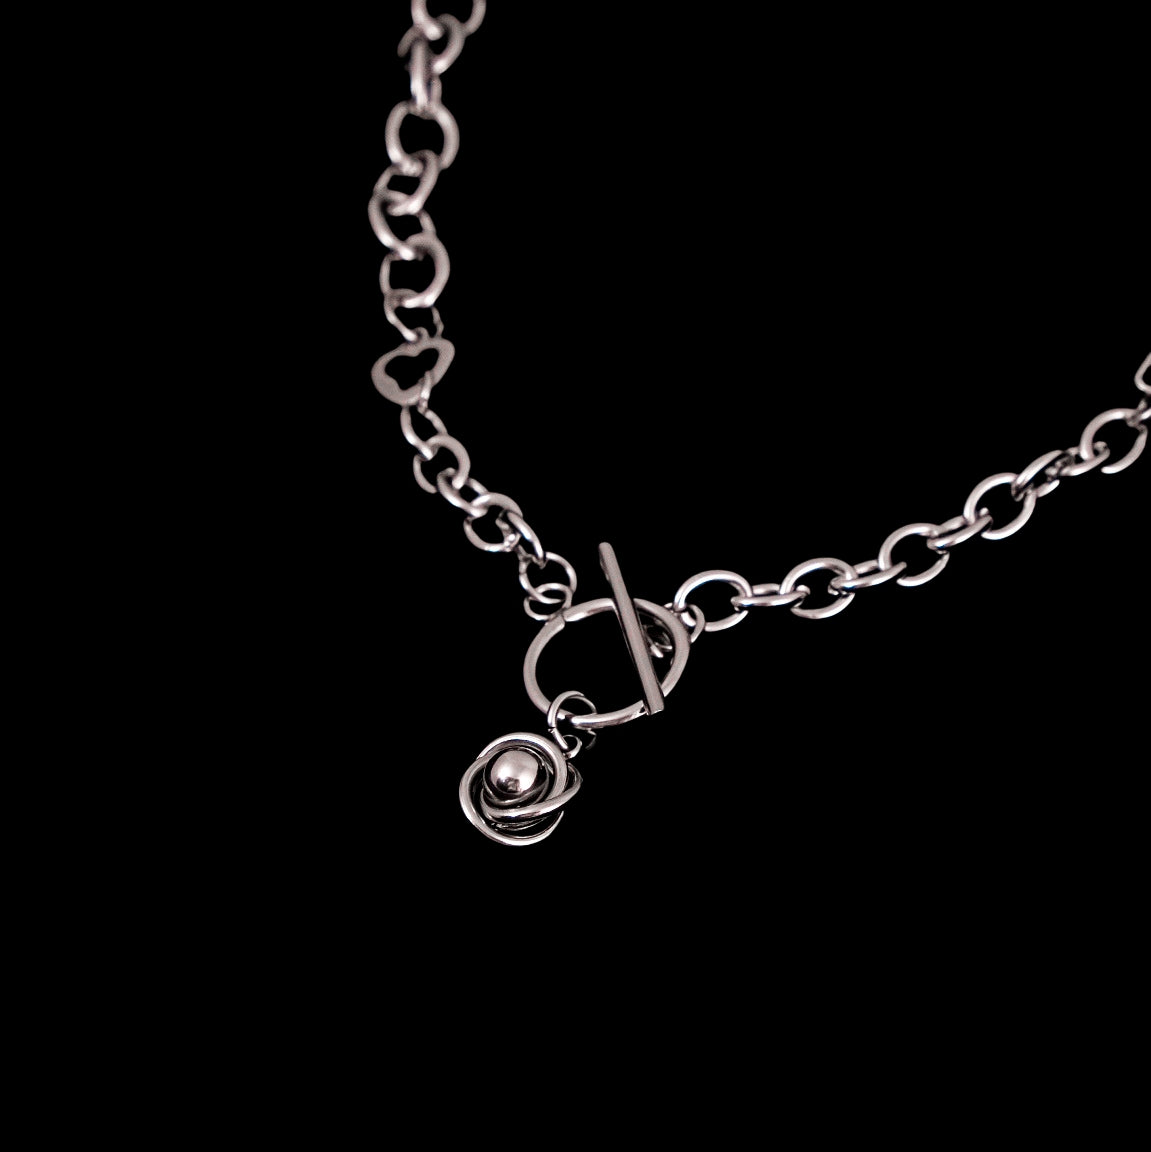 Circling Rose Necklace